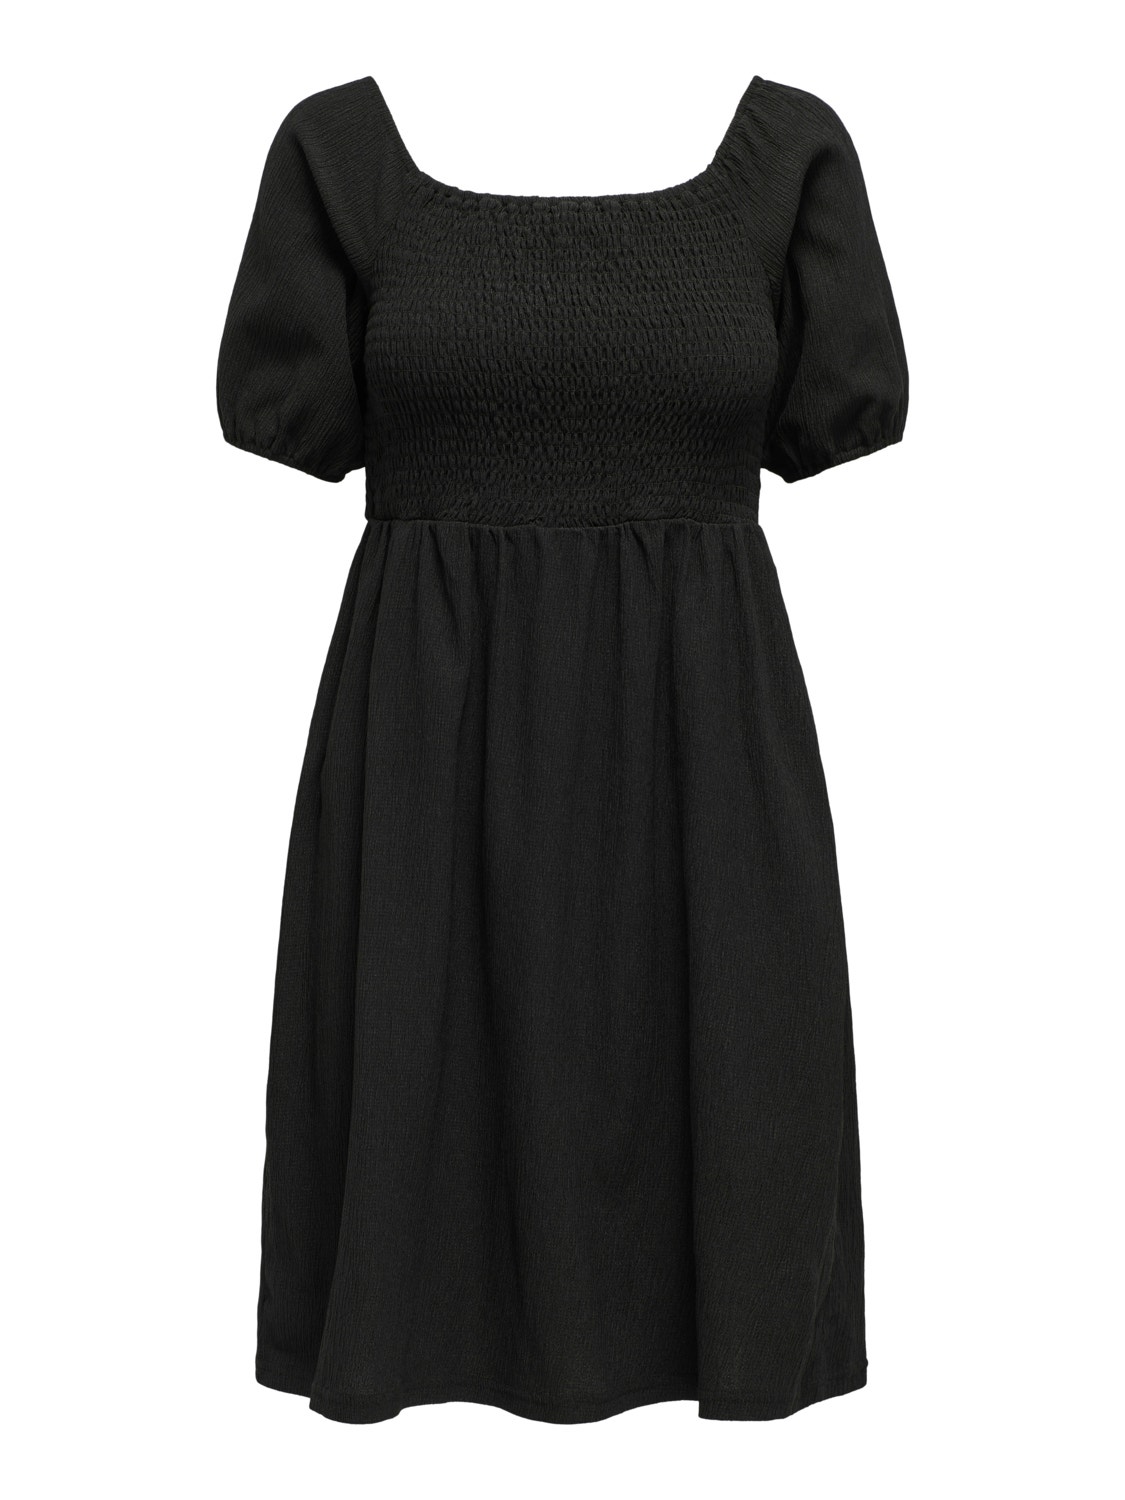 ONLY Robe courte Loose Fit Col carré -Black - 15292097